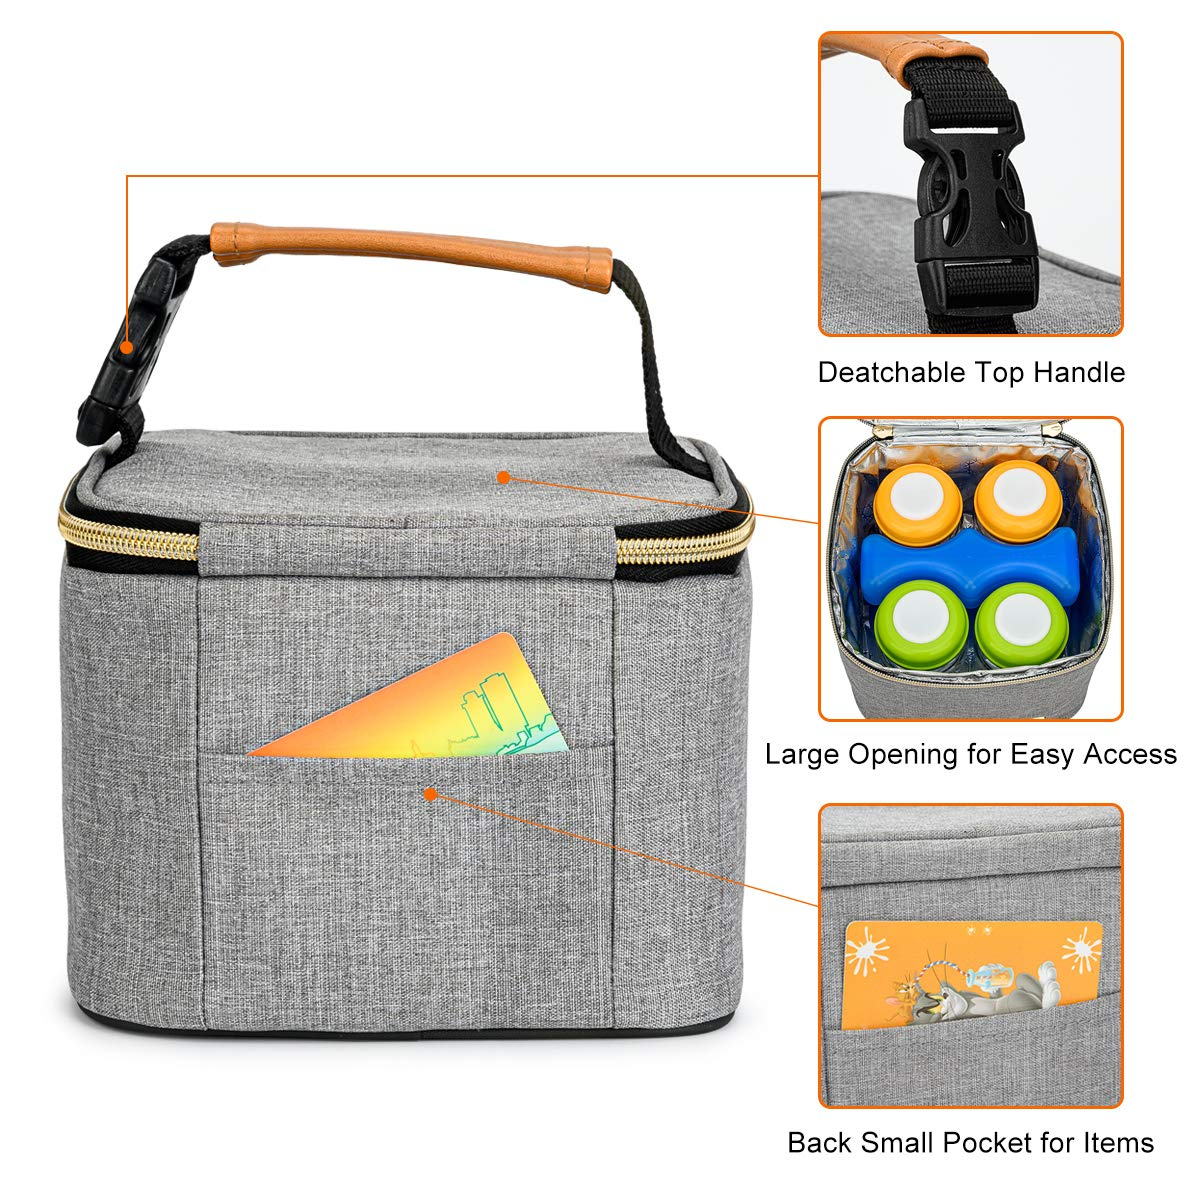 Factory Portable Breast Milk Cooler Bag 4 Baby Bottles breast pump bag thermal insulated Tote Bag for Nursing Mom Daycare